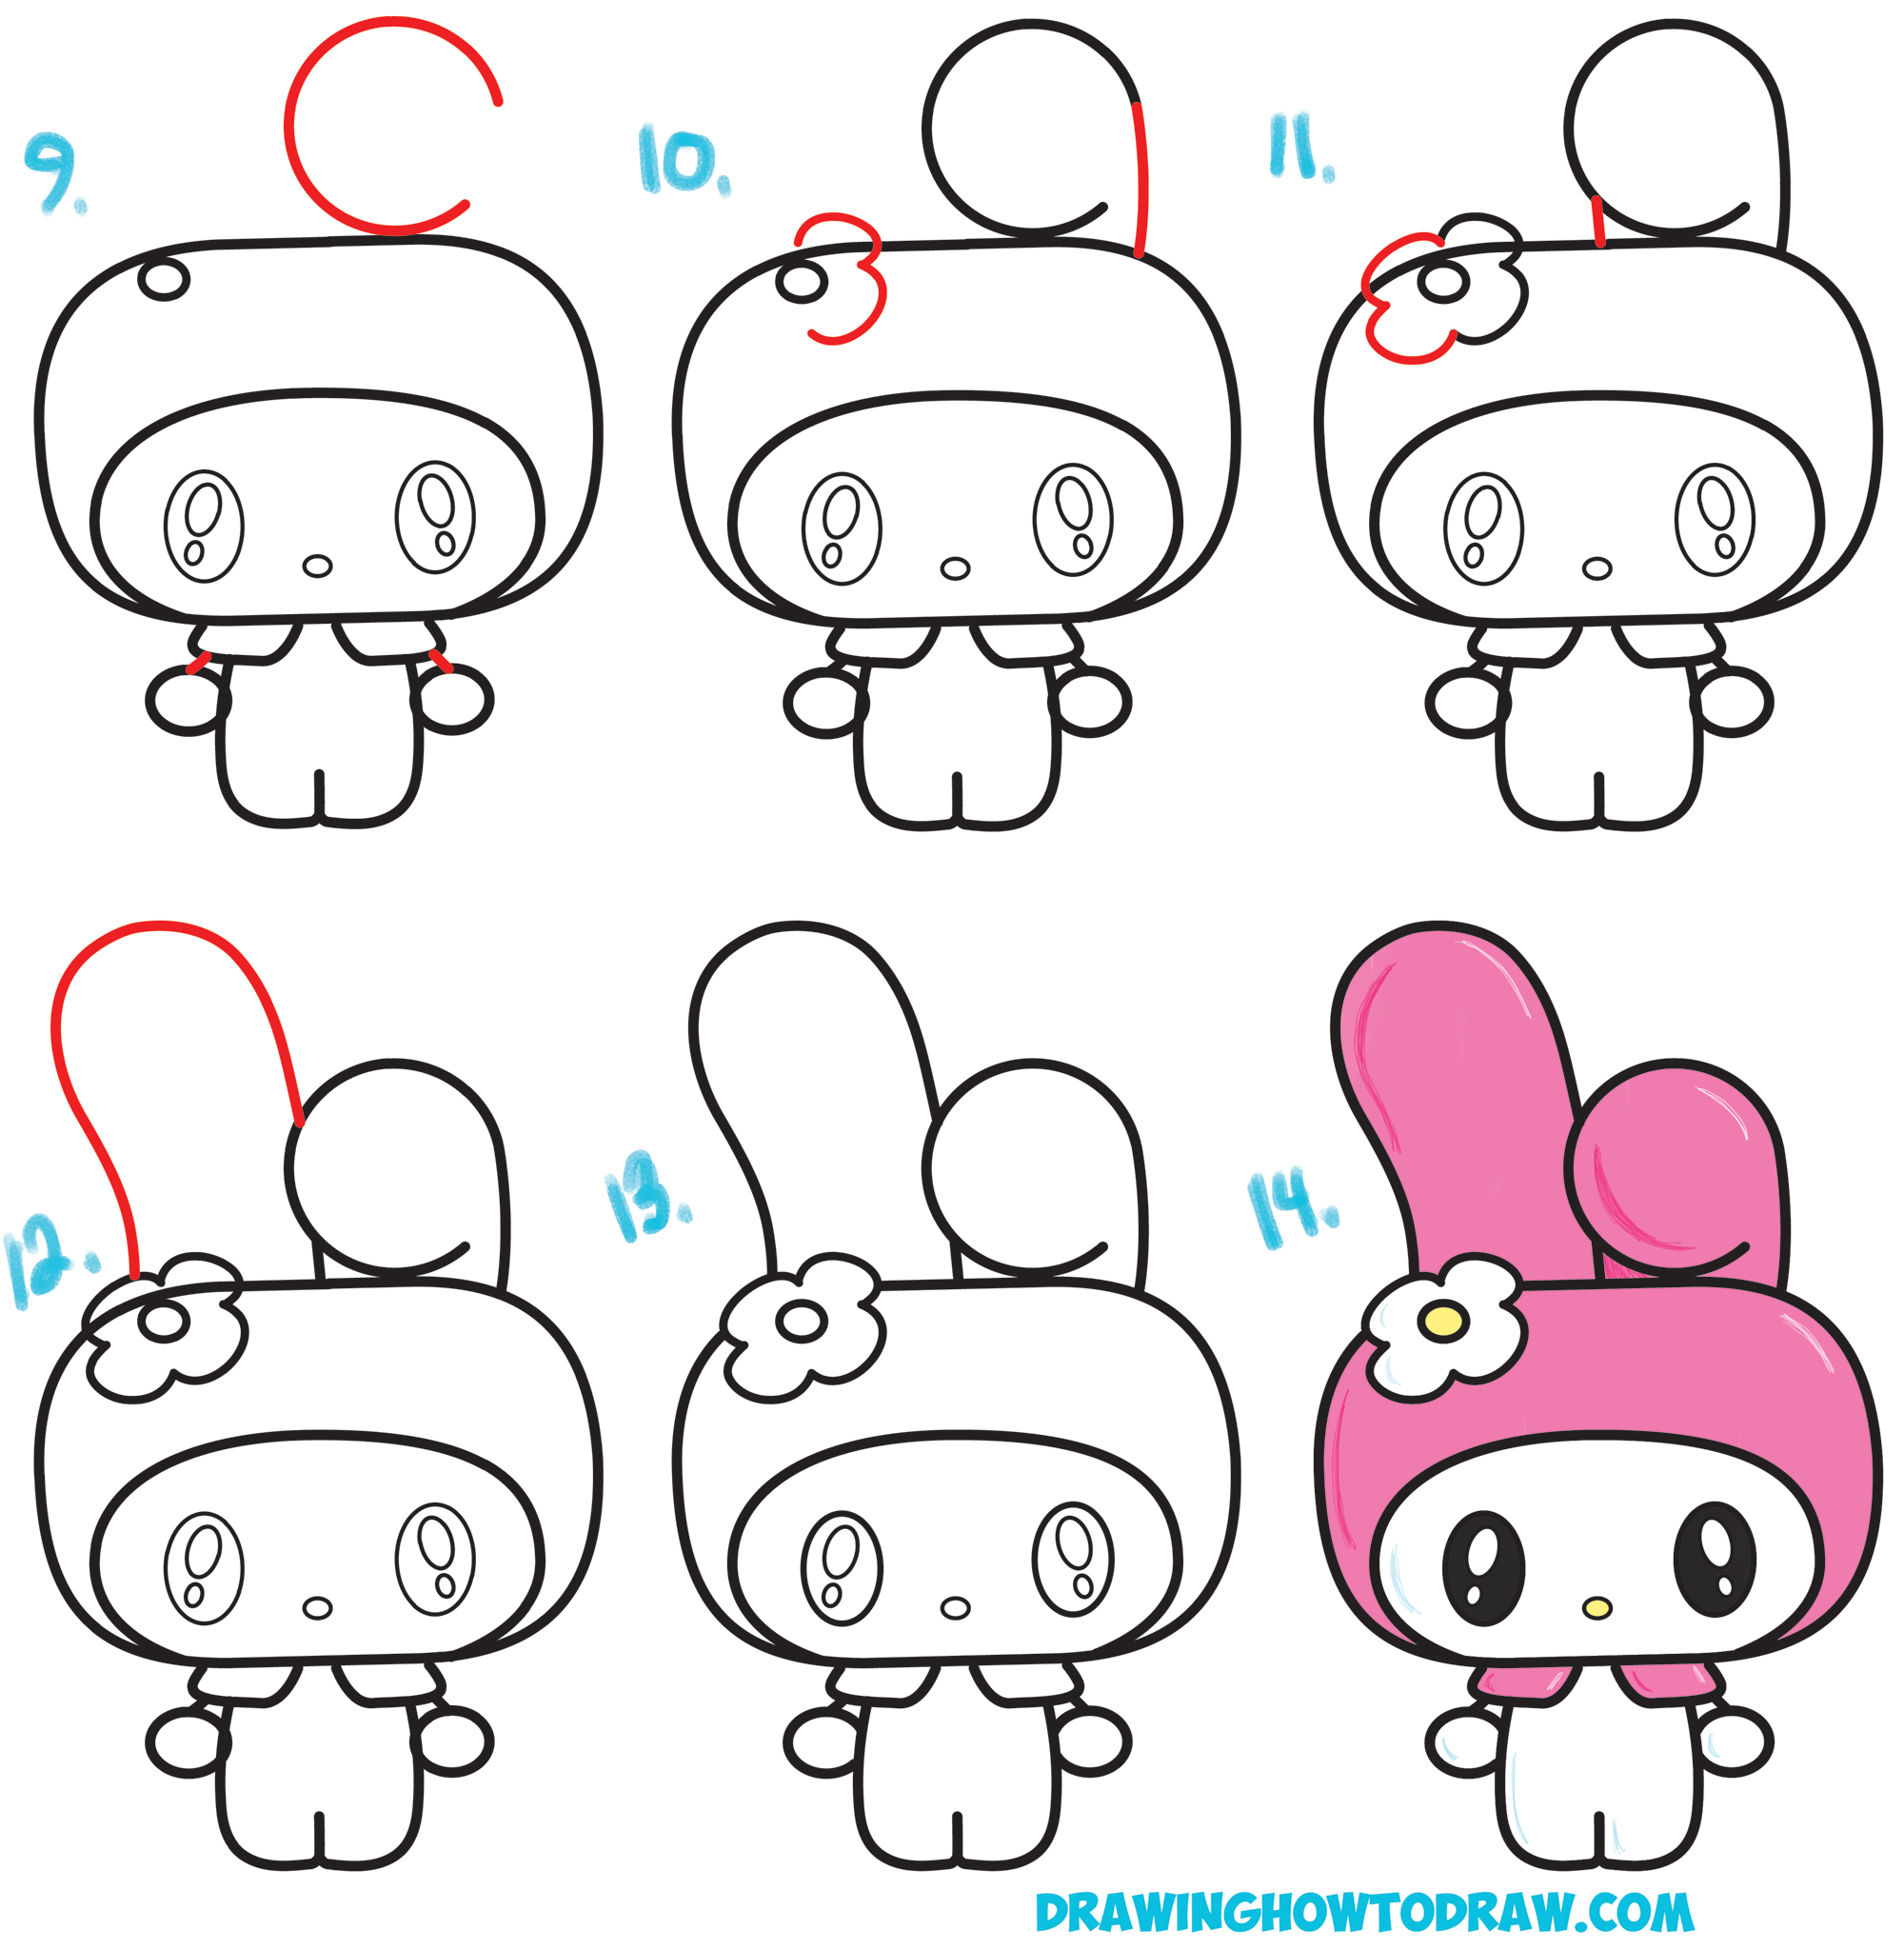 How to Draw Kawaii / Chibi My Melody from Hello Kitty : A Cute Bunny